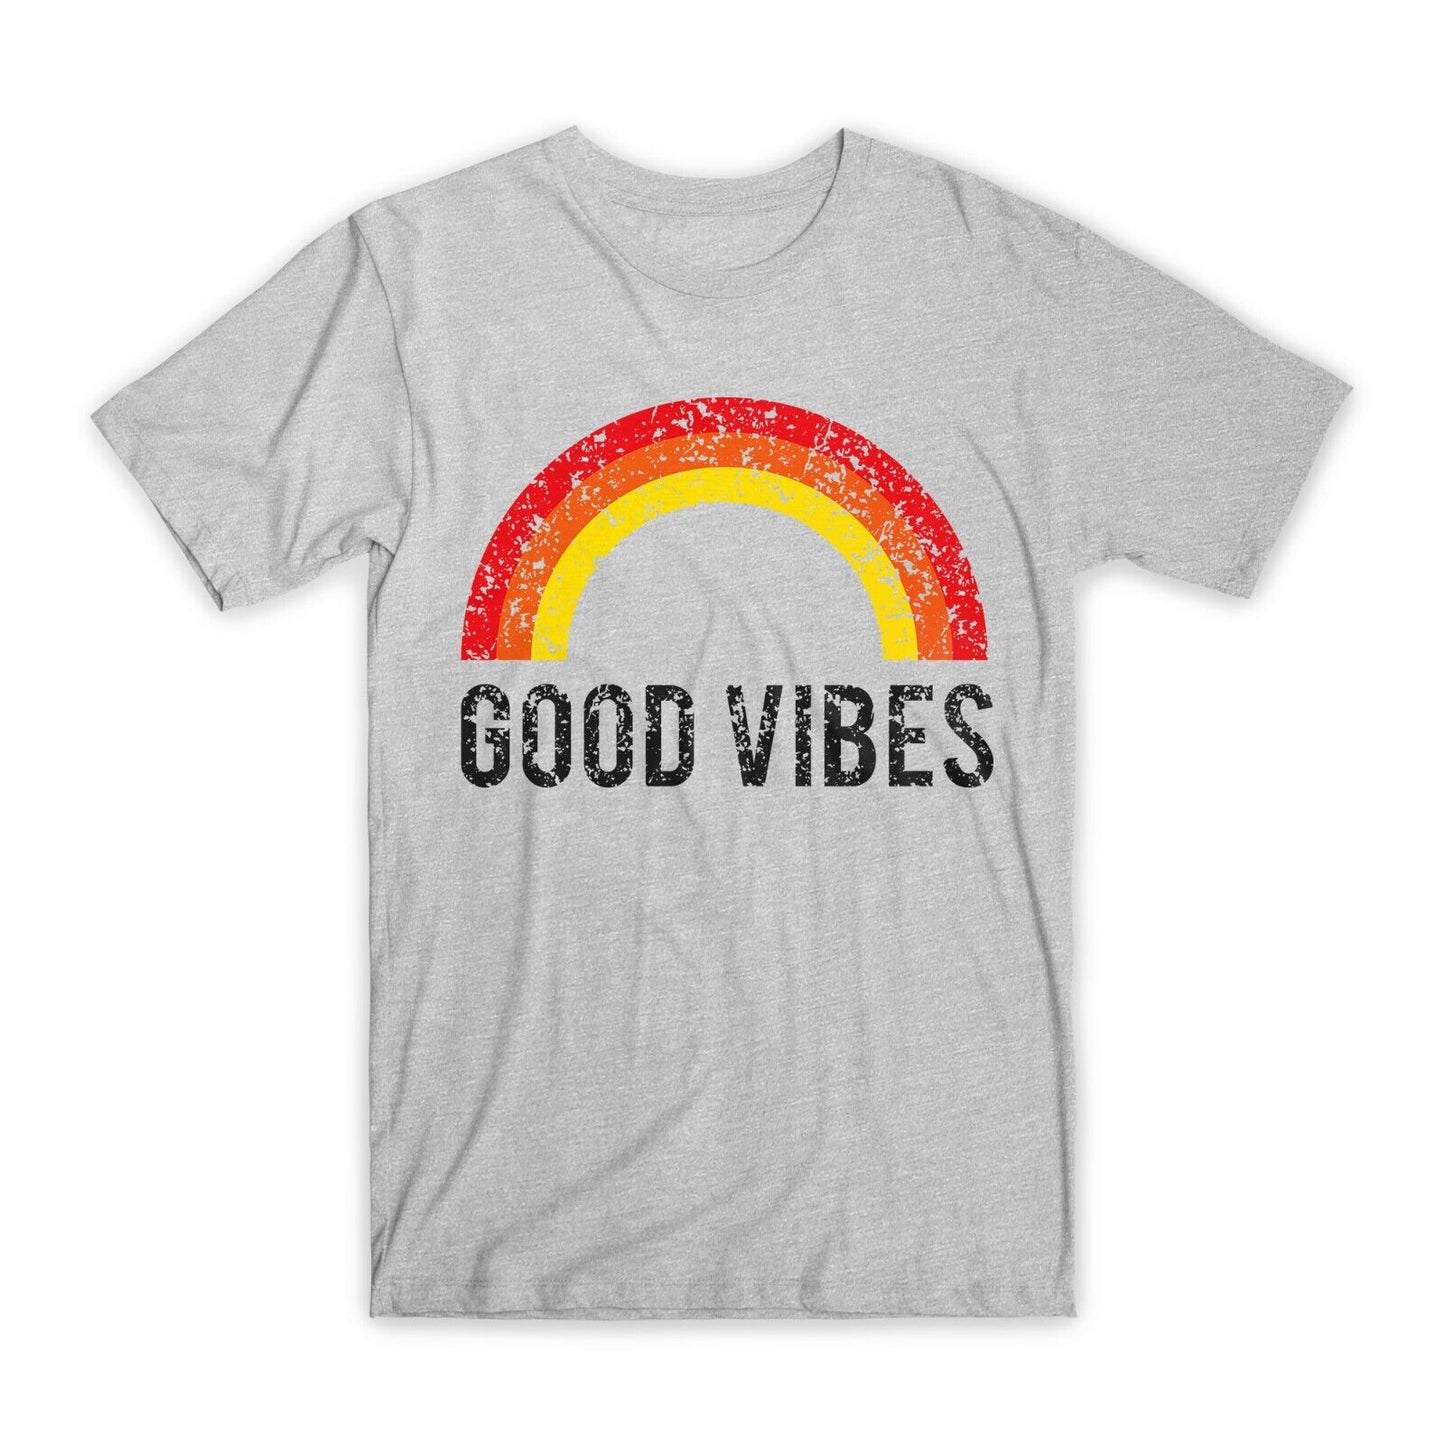 Good Vibes T-Shirt Premium Soft Cotton Crew Neck Funny Tees Novelty Gifts NEW